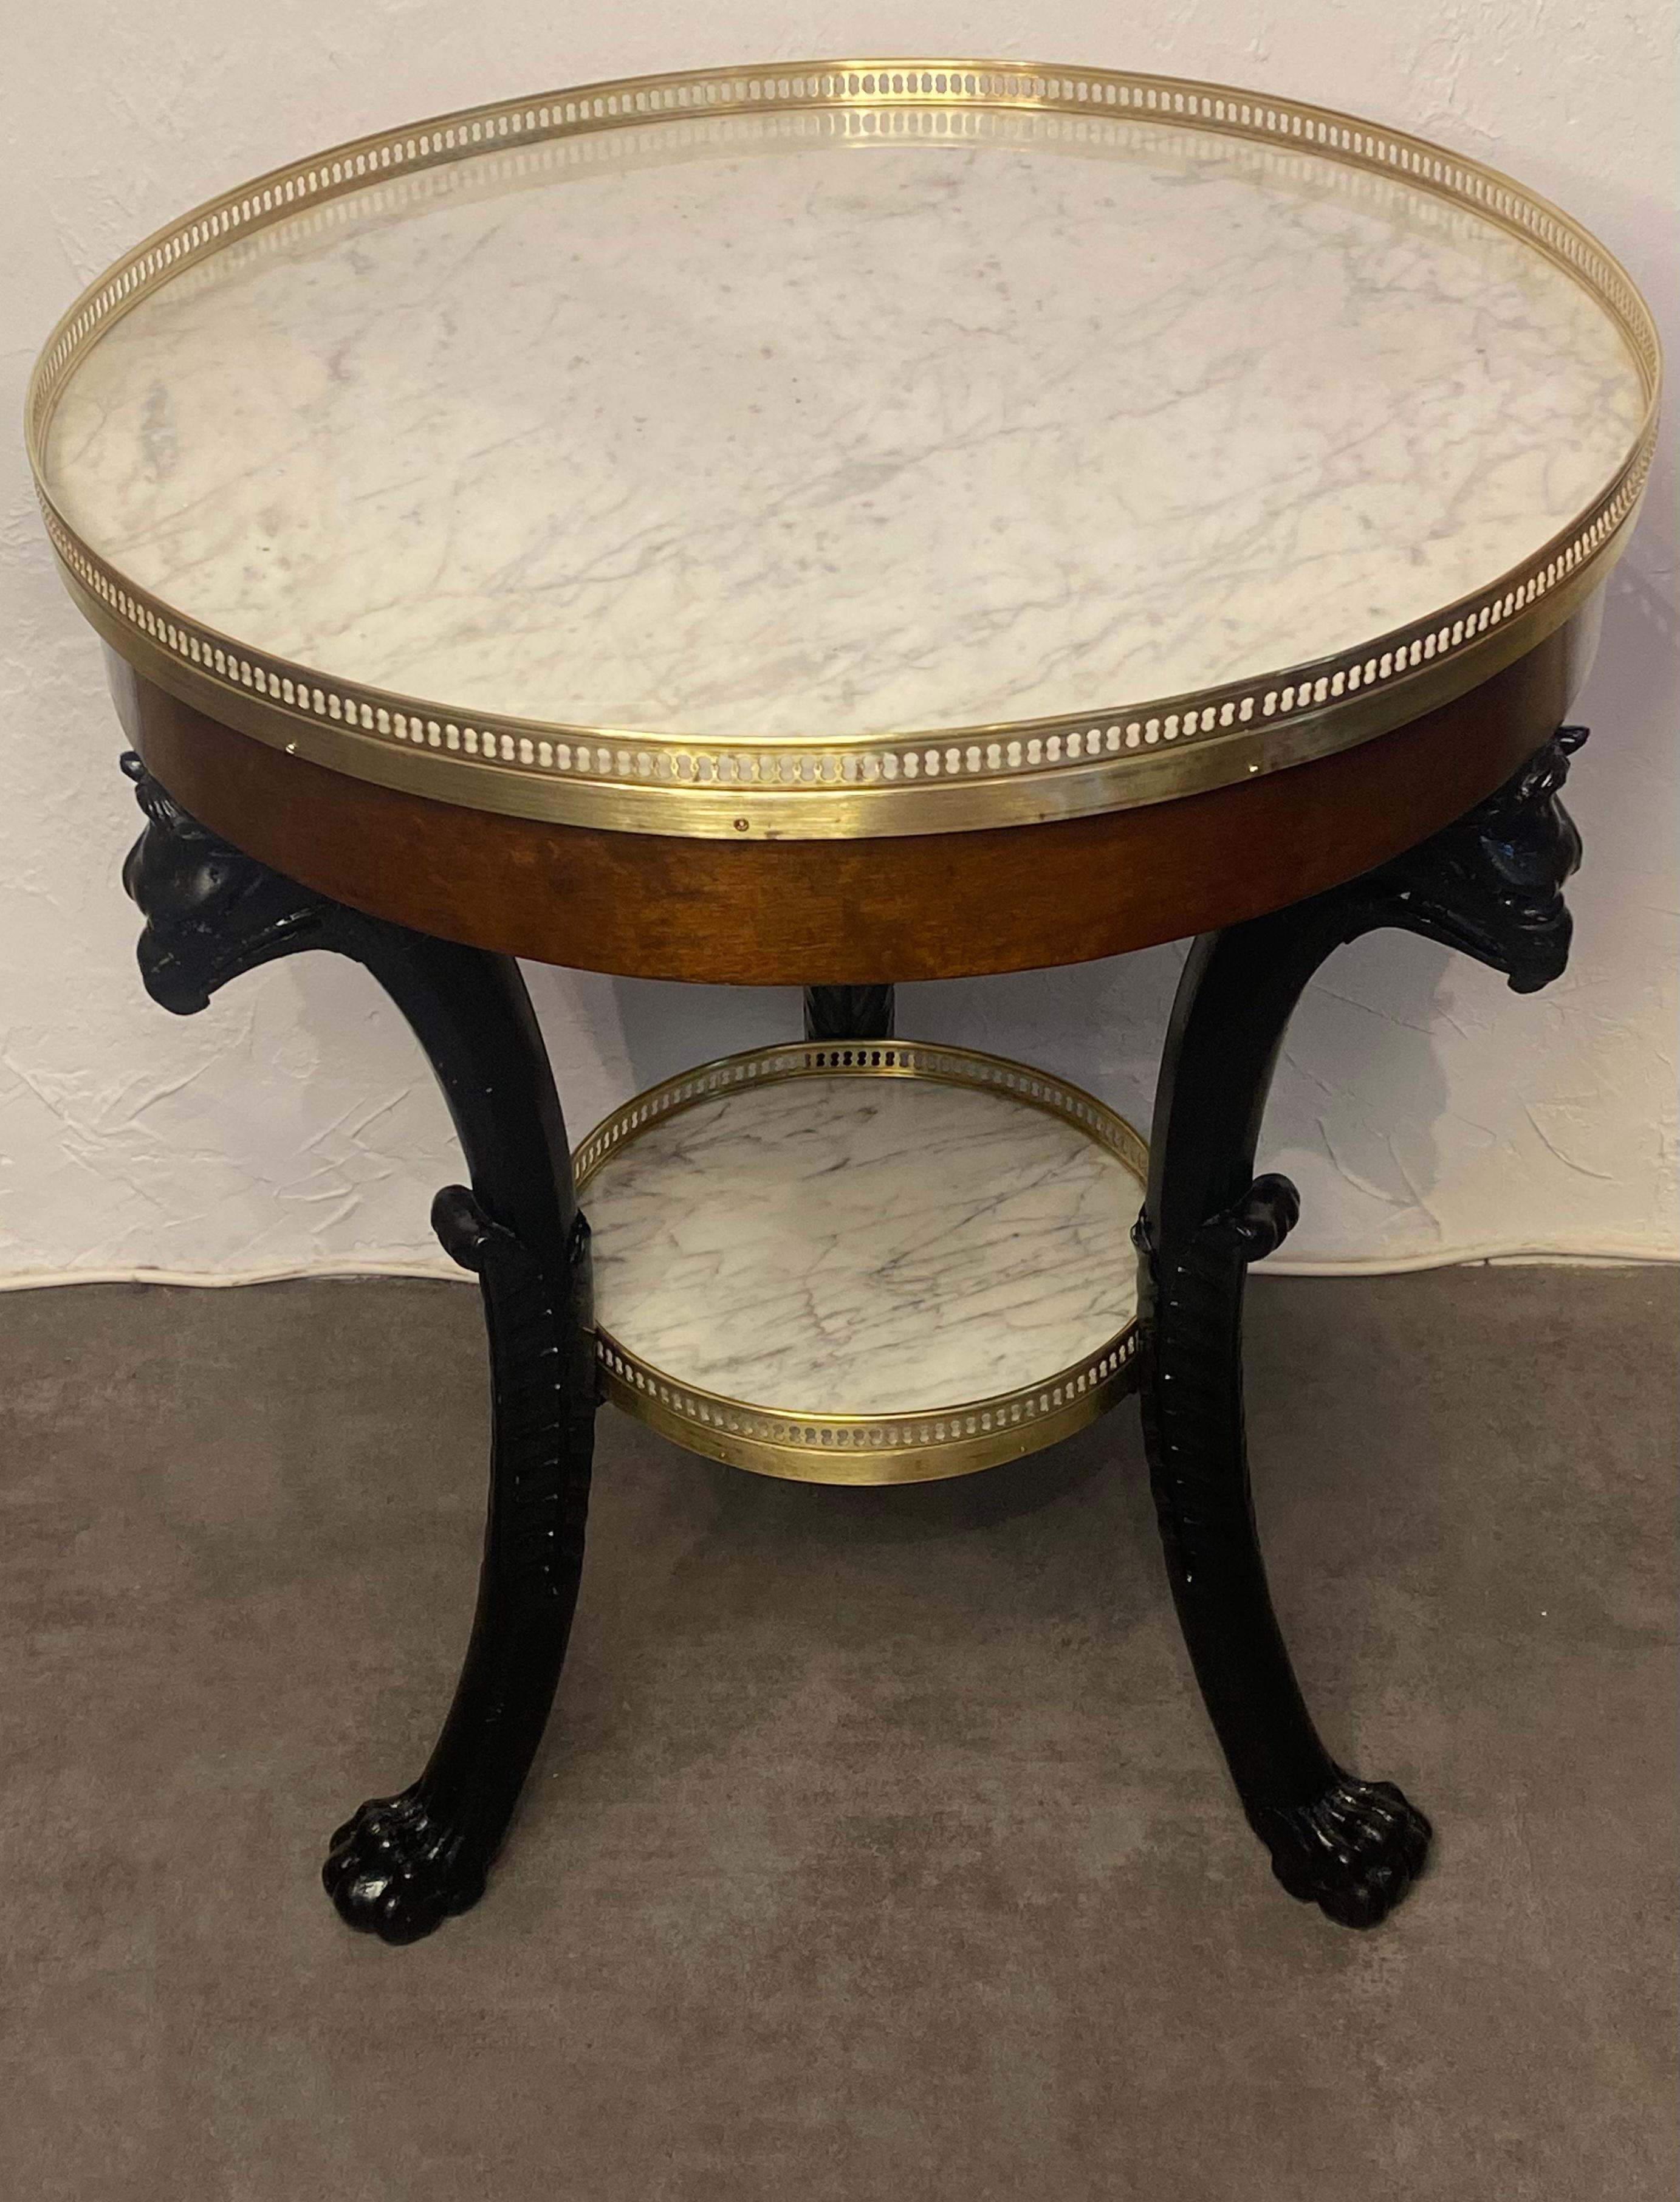 Tripod pedestal table in mahogany veneer.
The white marble top surrounded by openwork brass rests on 3 bronze-patinated mahogany legs with griffin heads ending in lion claws. An intermediate shelf at the crotch.
Very fine Parisian production from